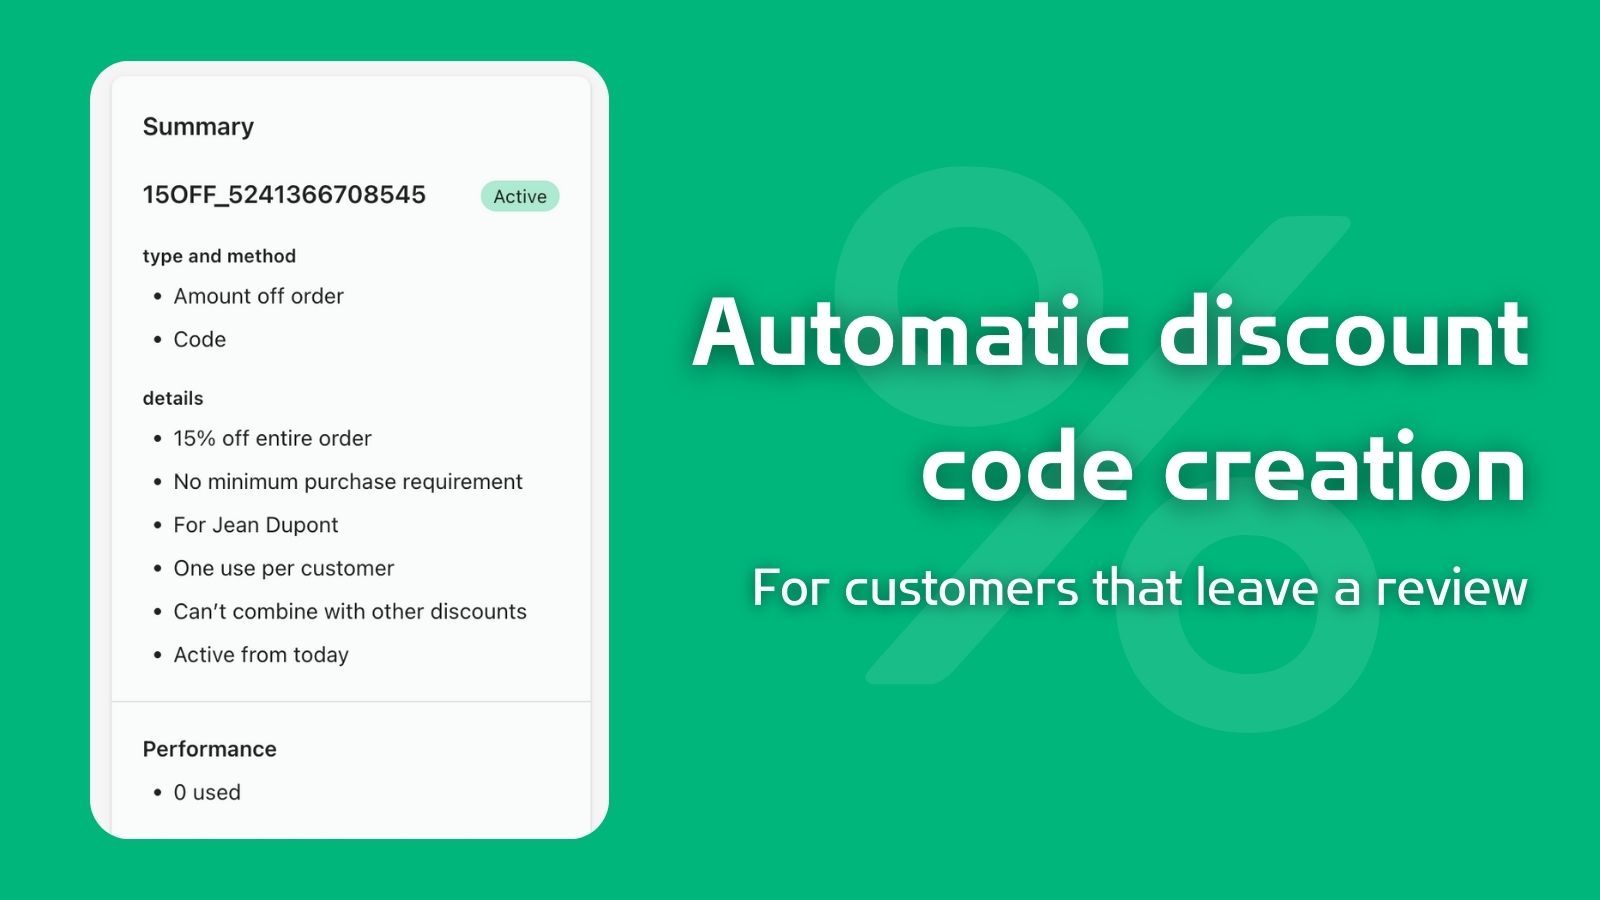 Automatic discount code creation